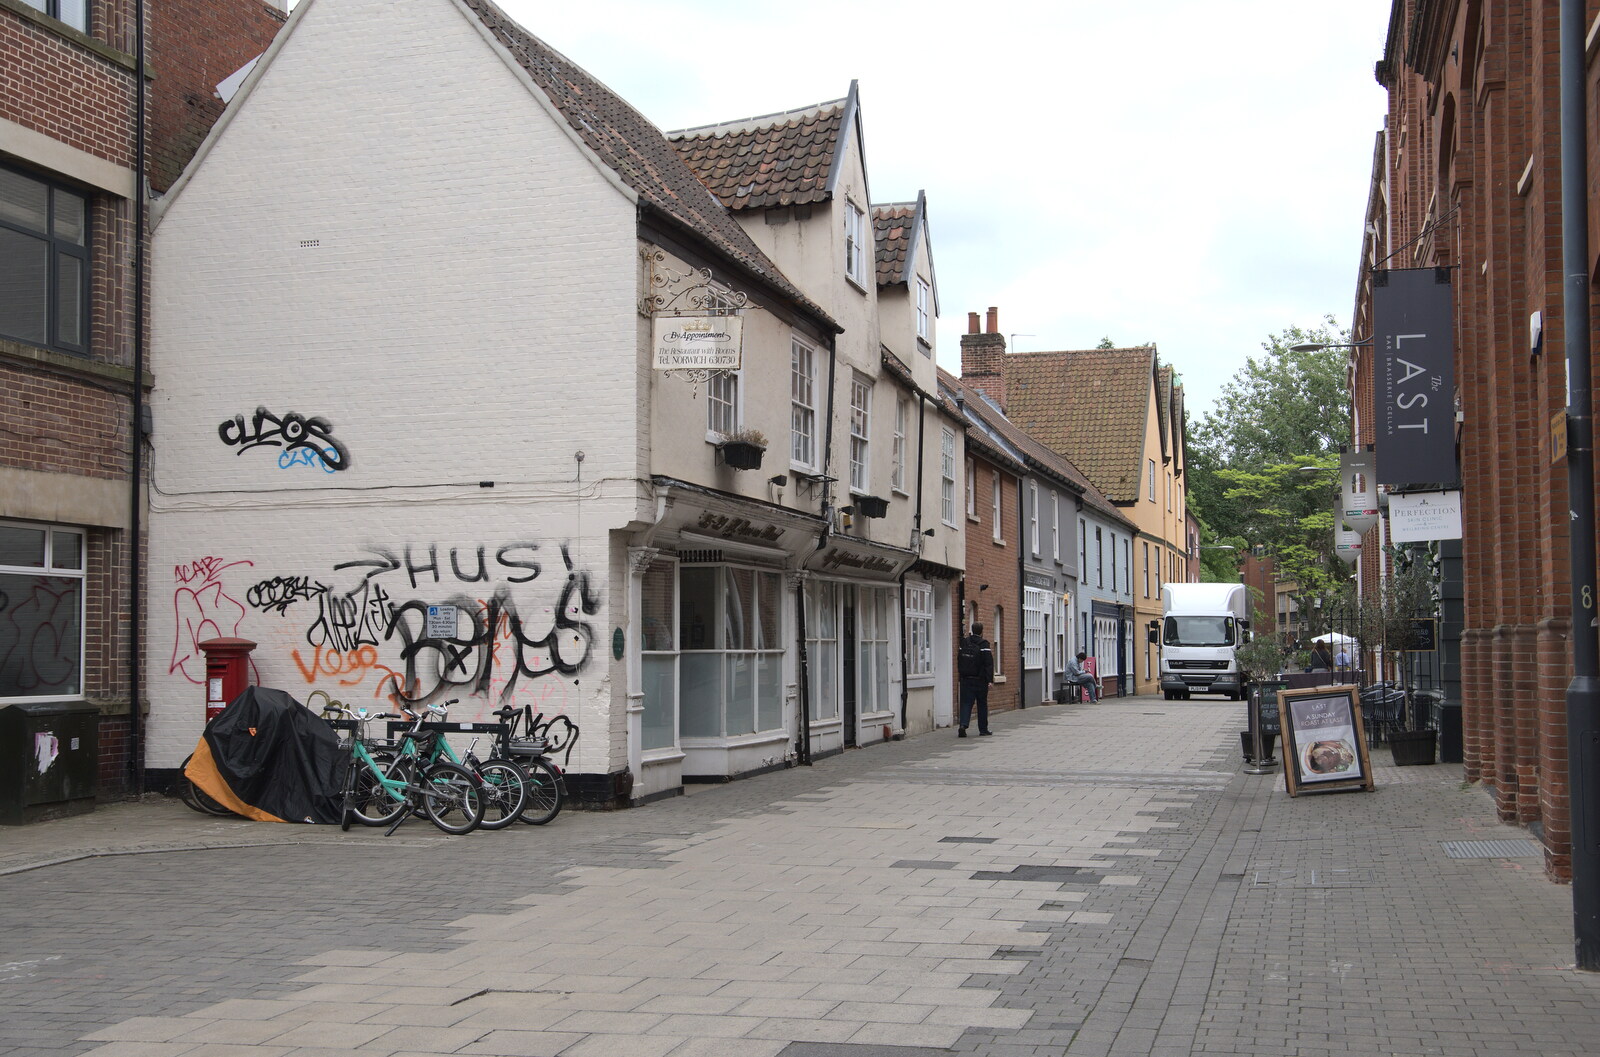 Looking down St. George's Street from Discovering the Hidden City: Norwich, Norfolk - 23rd May 2022